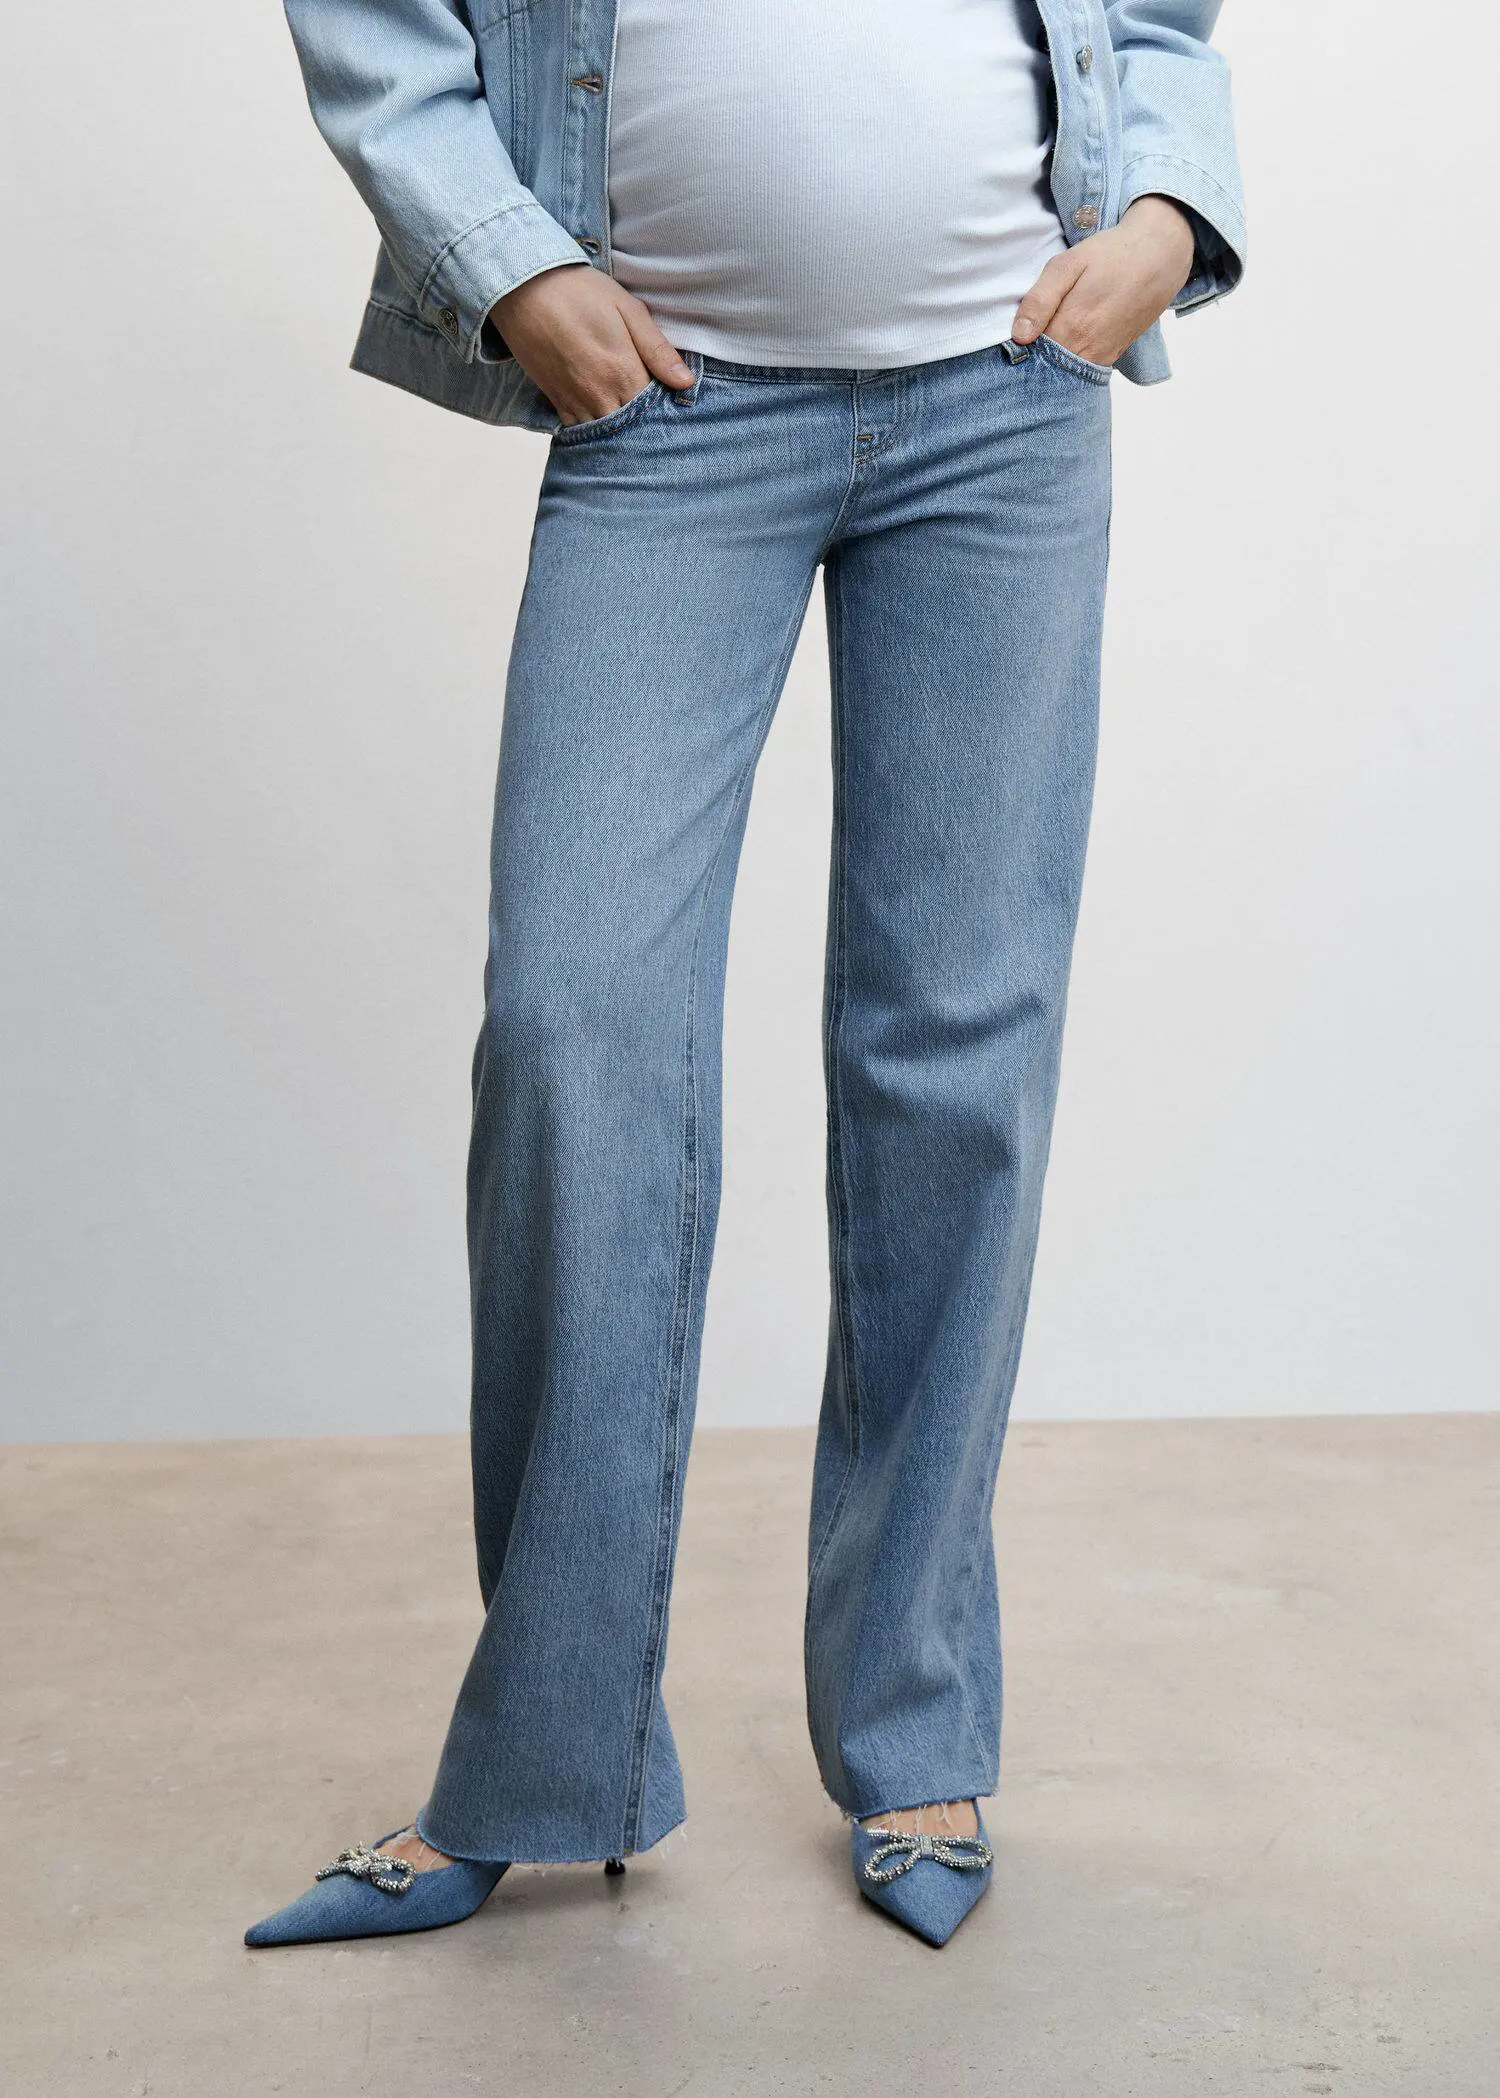 Mango Maternity wideleg jeans. a woman wearing a pair of blue jeans. 